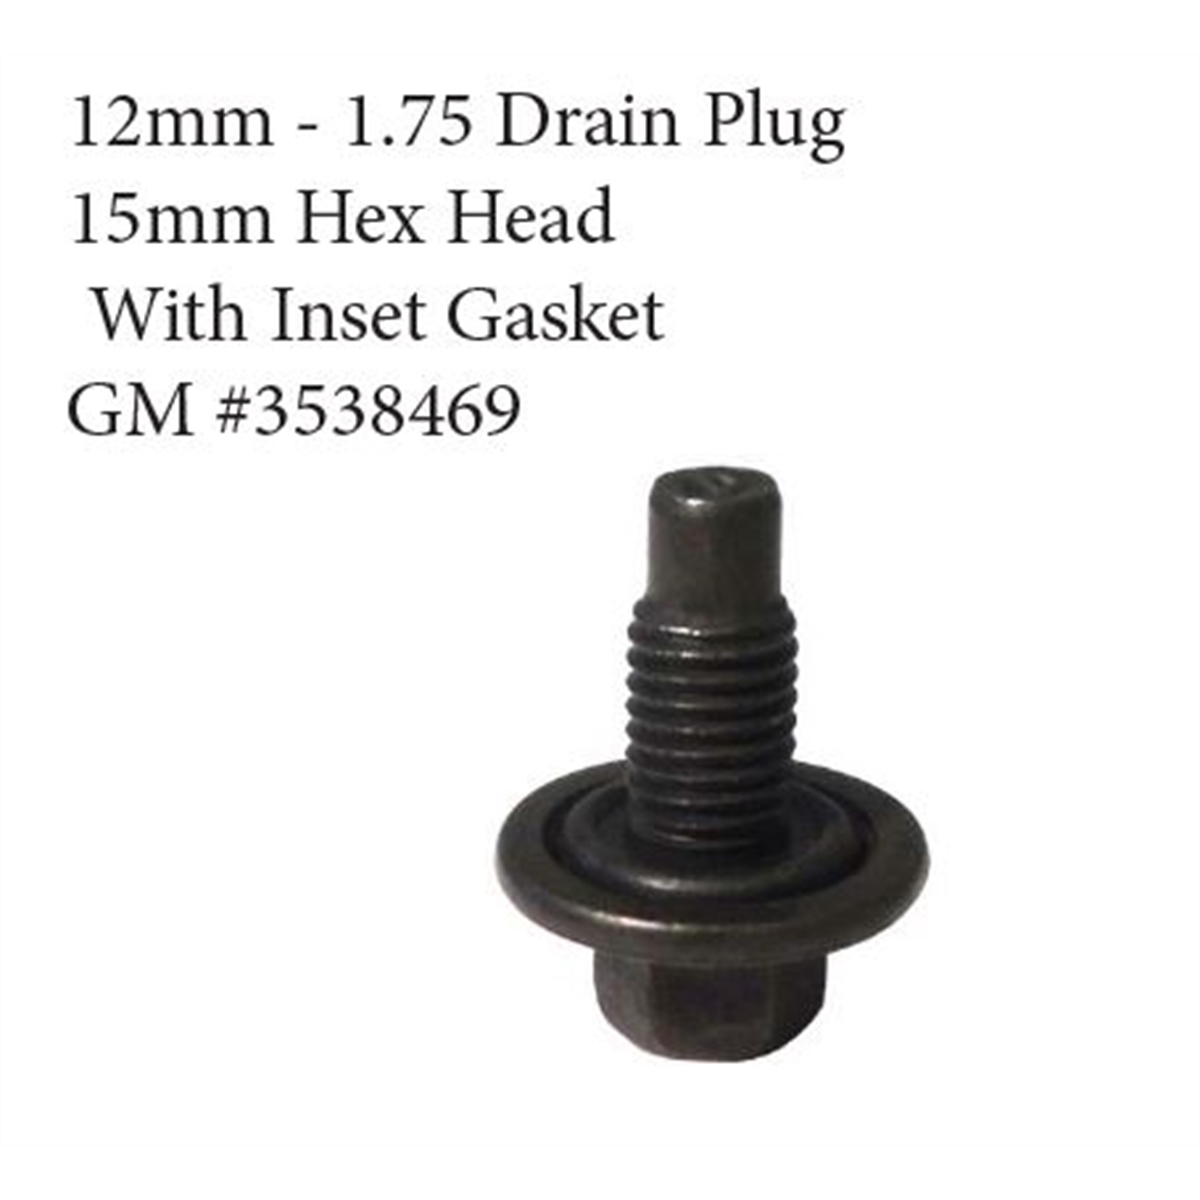 Drain Plug 12mm-1.75 With Inset Gasket